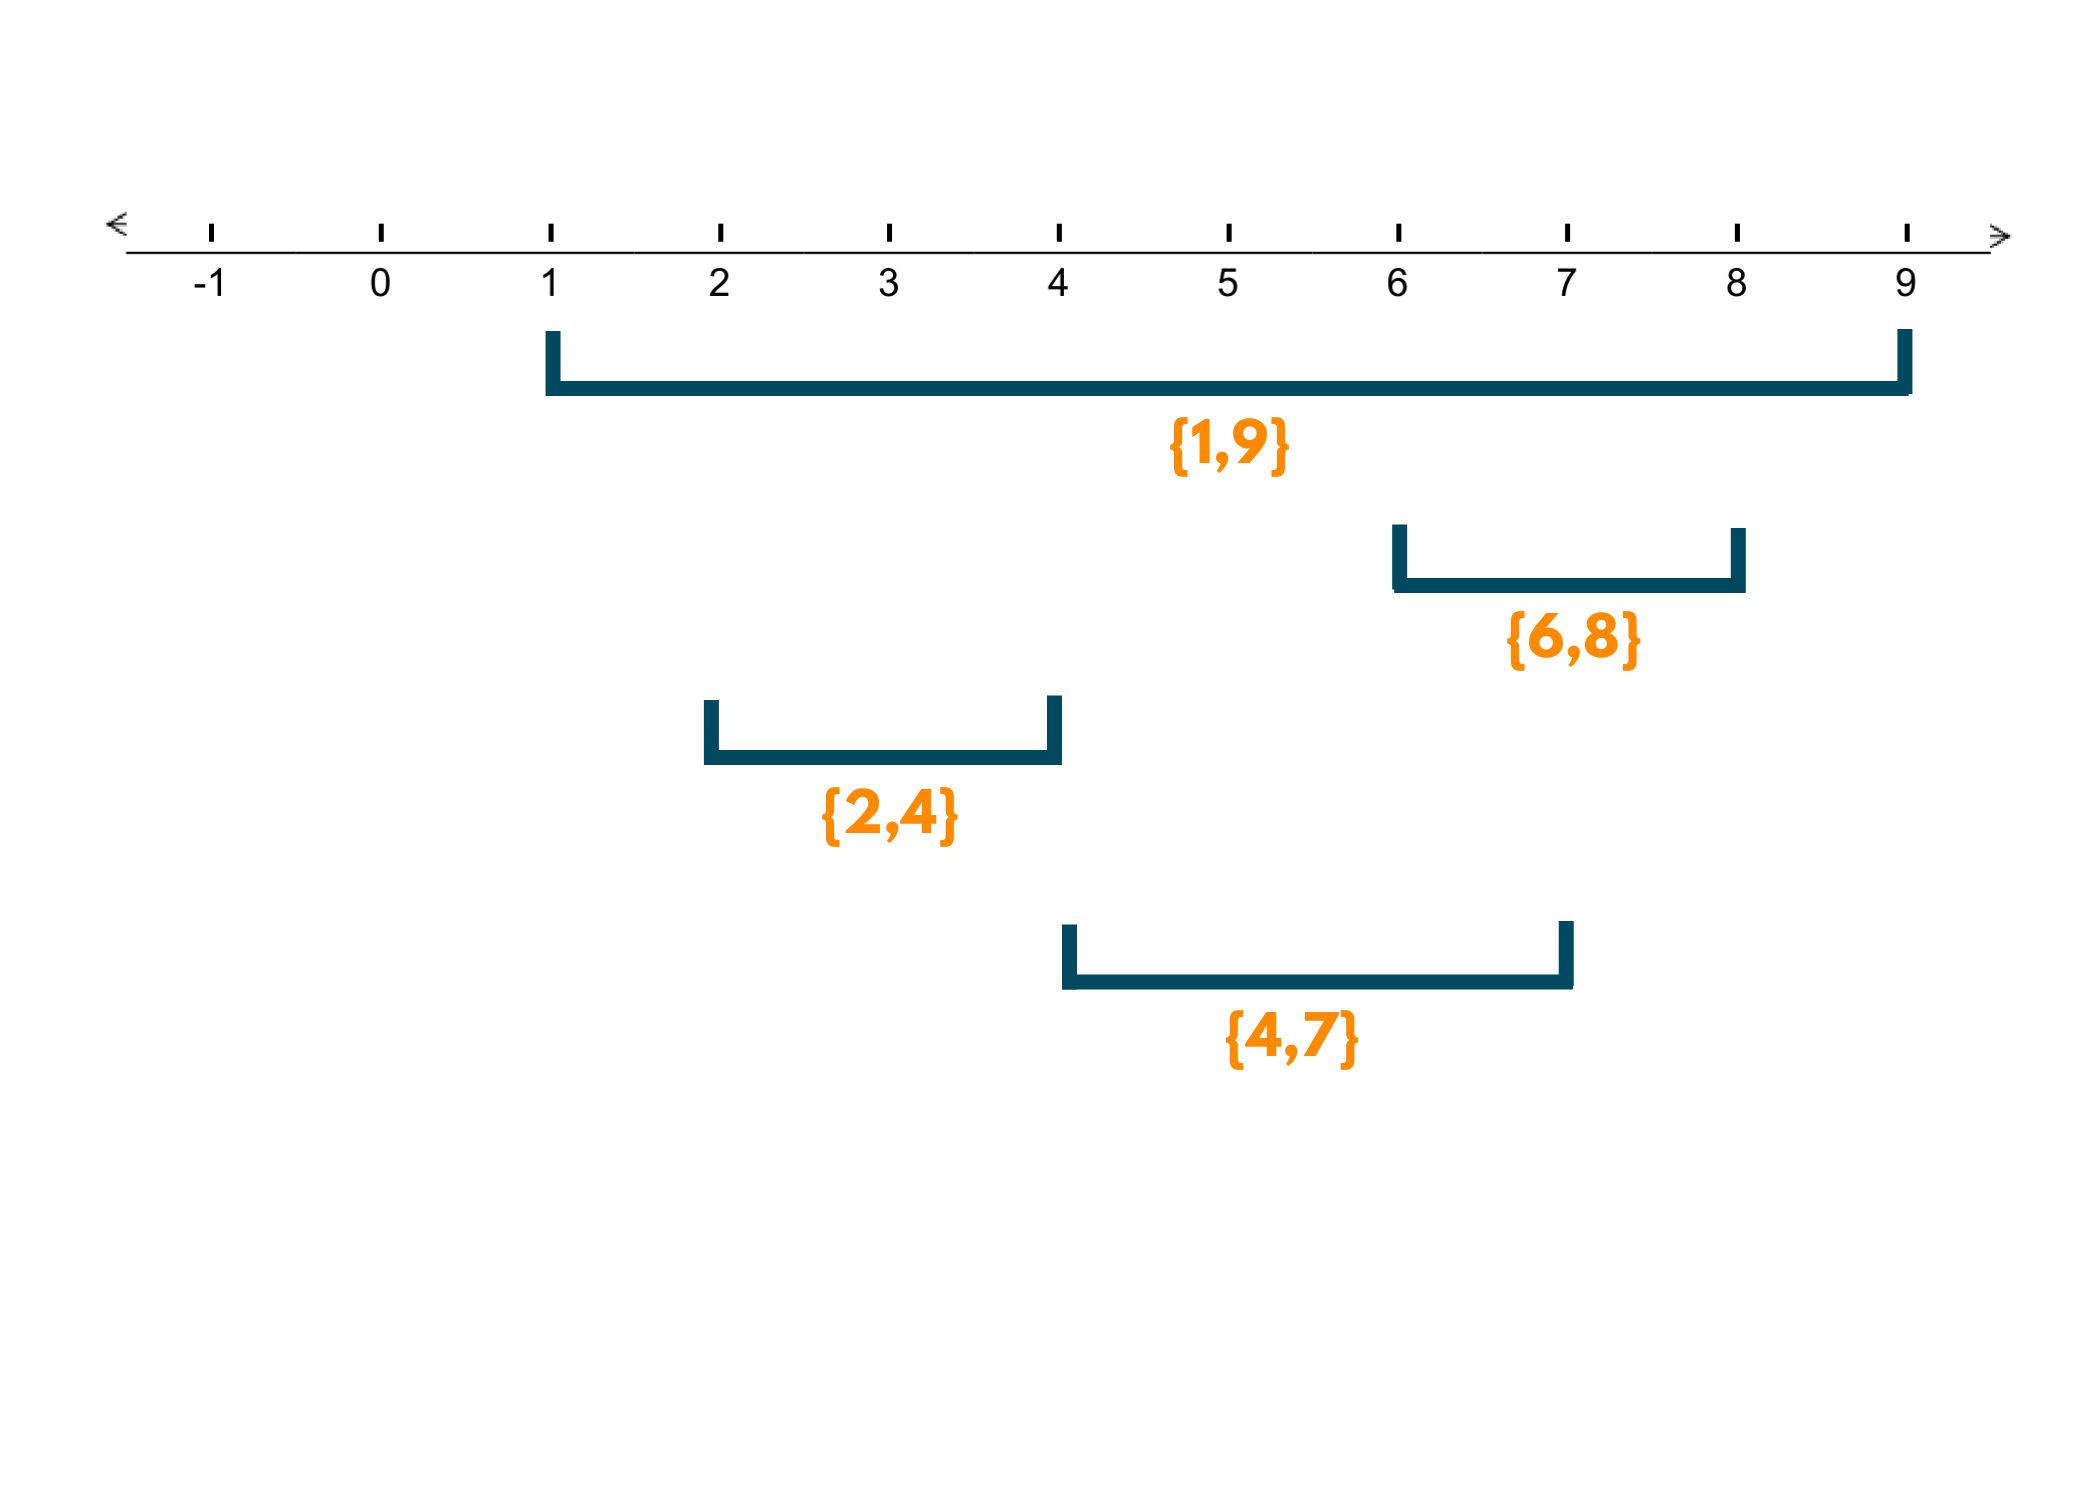 Merge Overlapping Intervals problem with solution